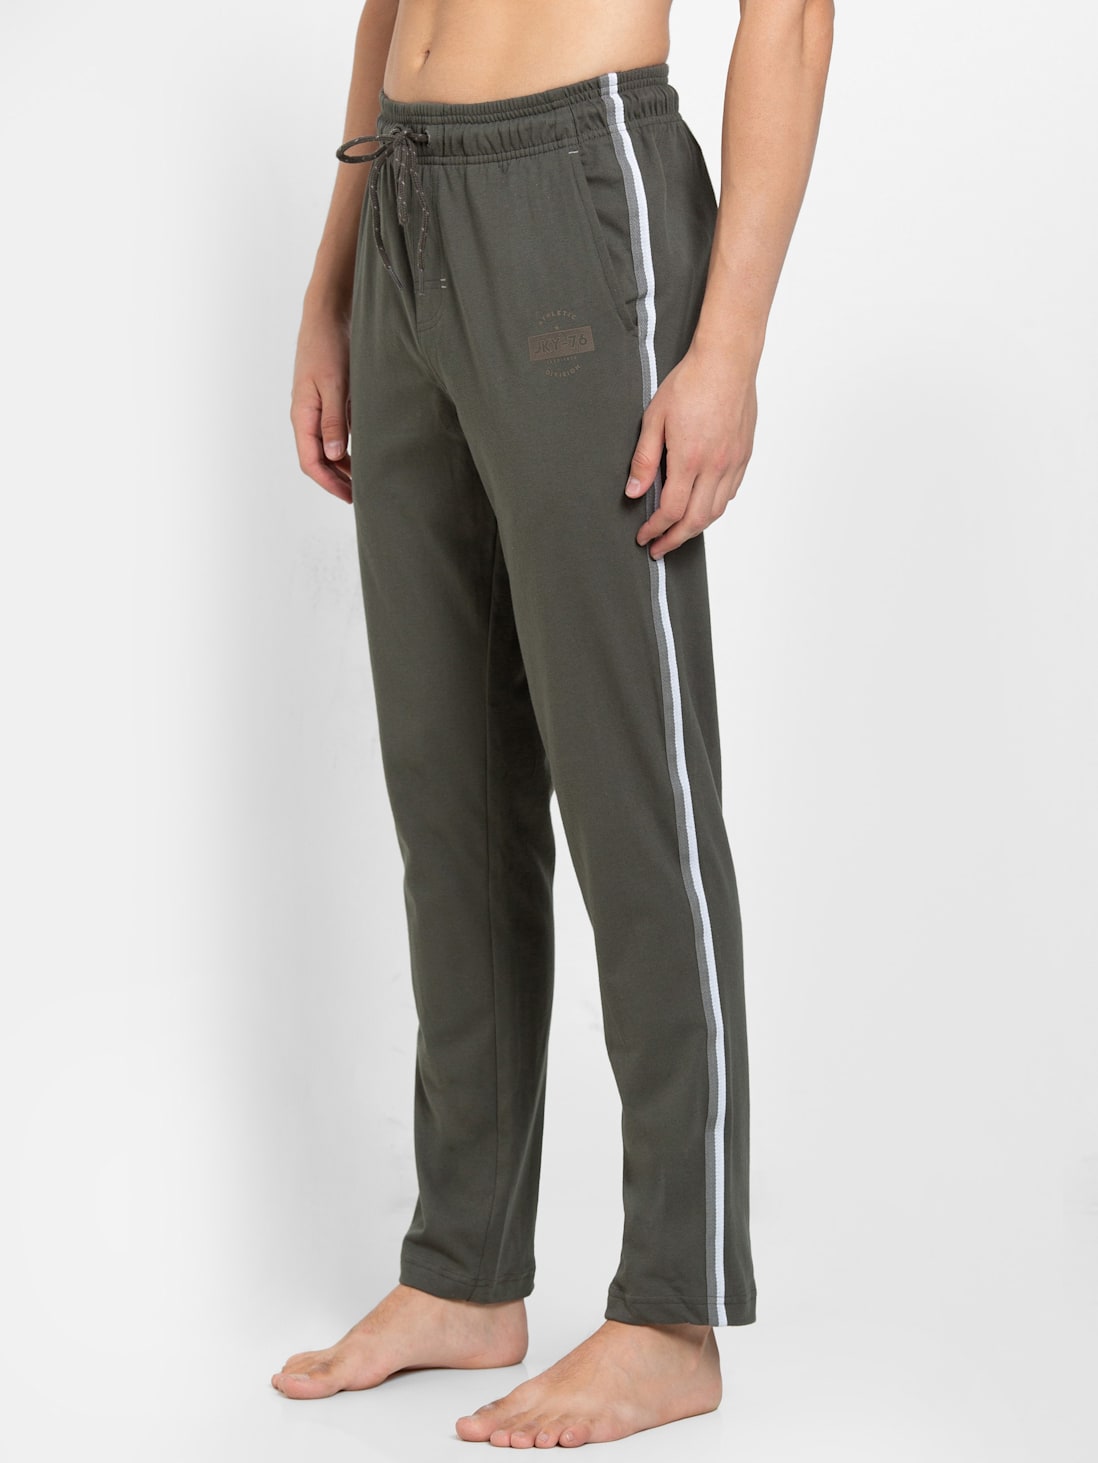 Buy Jockey 9508 Solid Color Track Pant With Drawstring Closure For Men Deep  Olive L Online at Low Prices in India at Bigdeals24x7.com